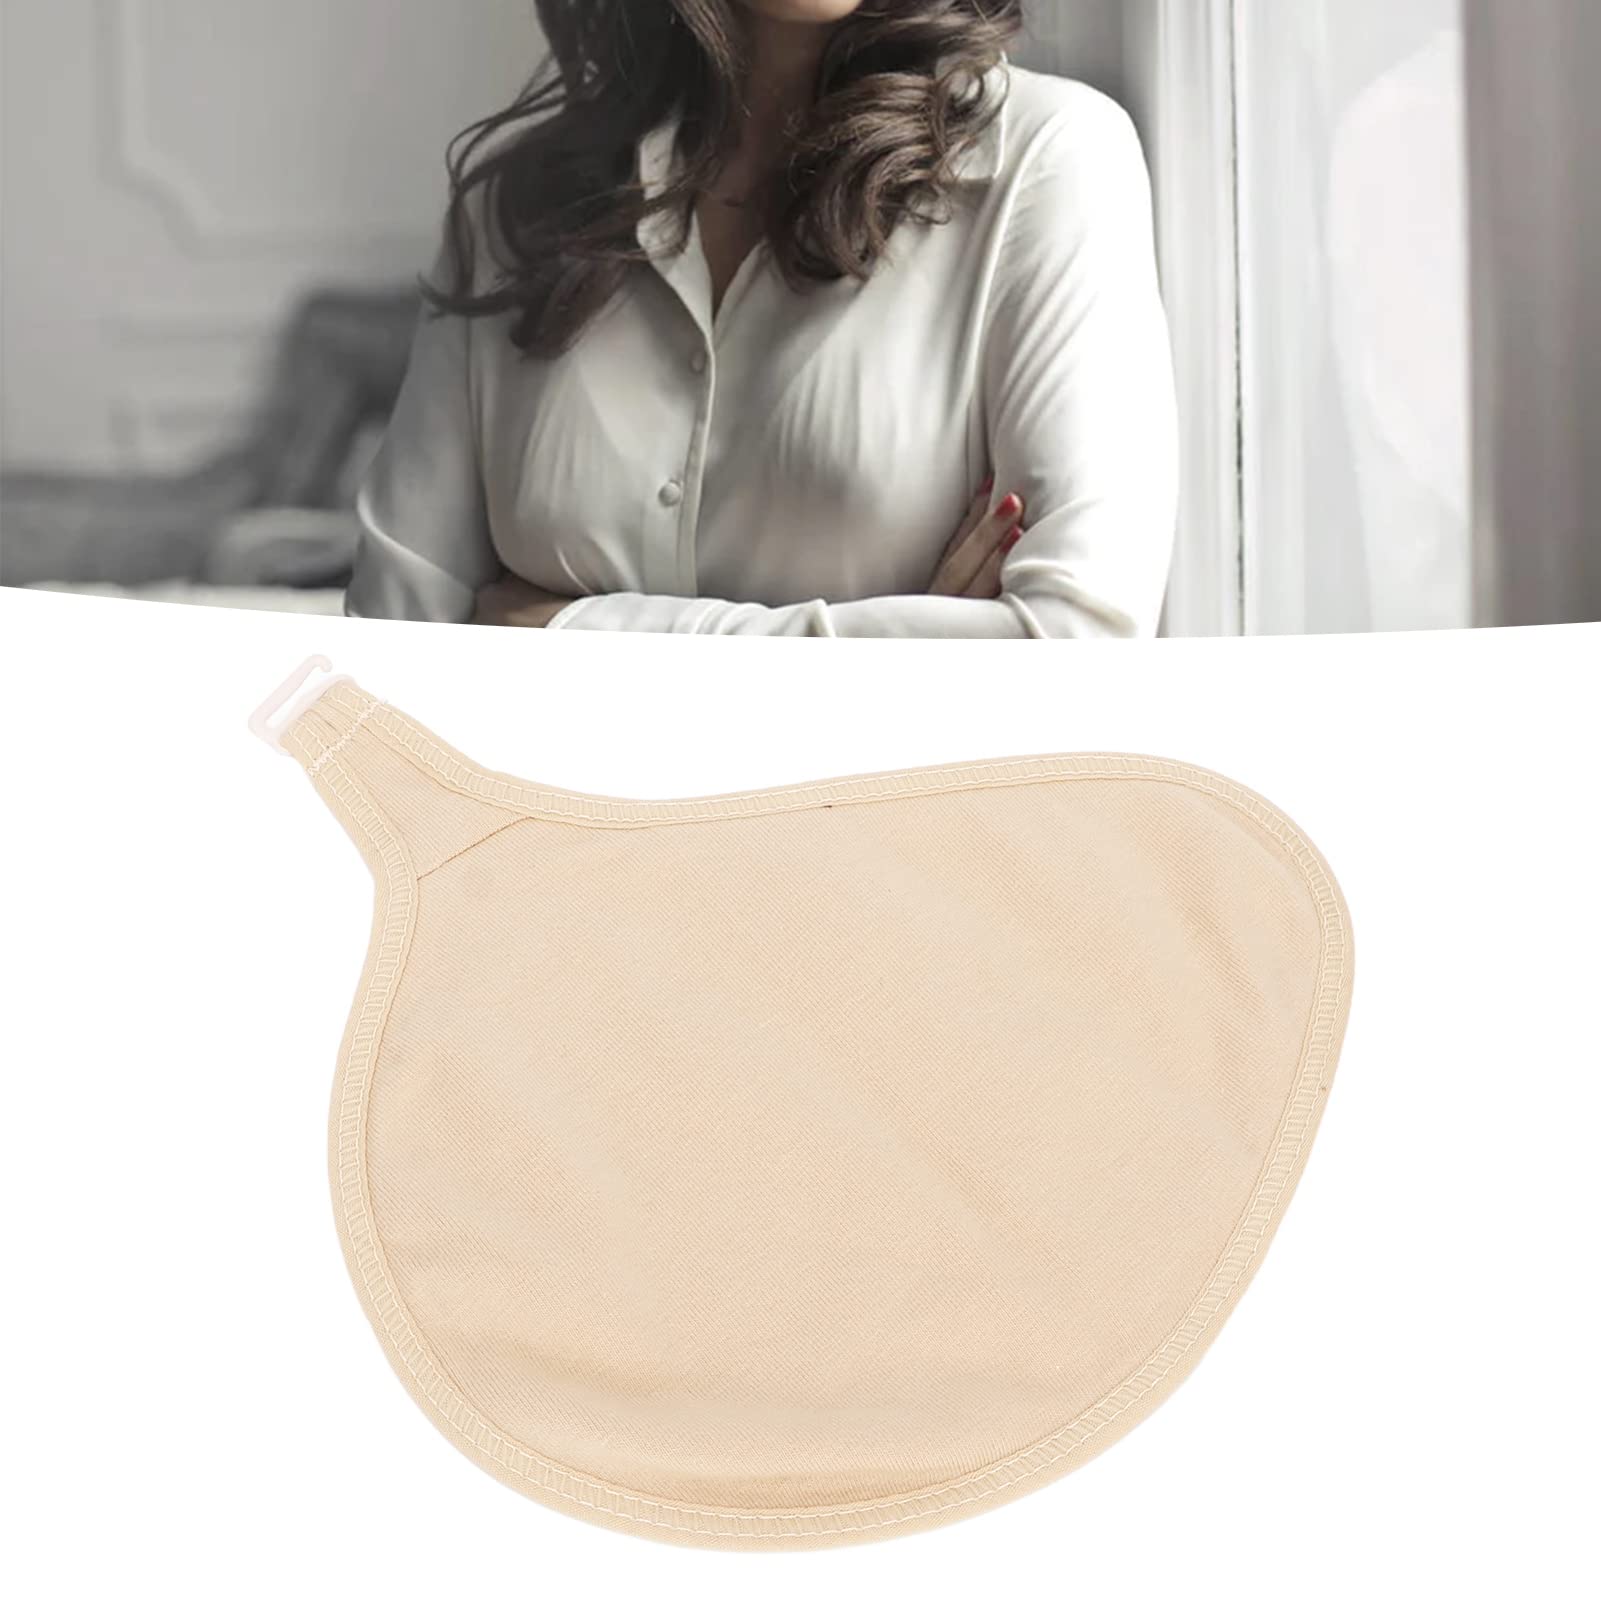 Bra Pads Inserts, Mastectomy Prosthesis Cover Bag Sweatabsorbent Cotton Elastic Silicone Breast Forms Protective Cover Mastectomy Prosthesis Hook Design Bra Inserts Push Up (Left)